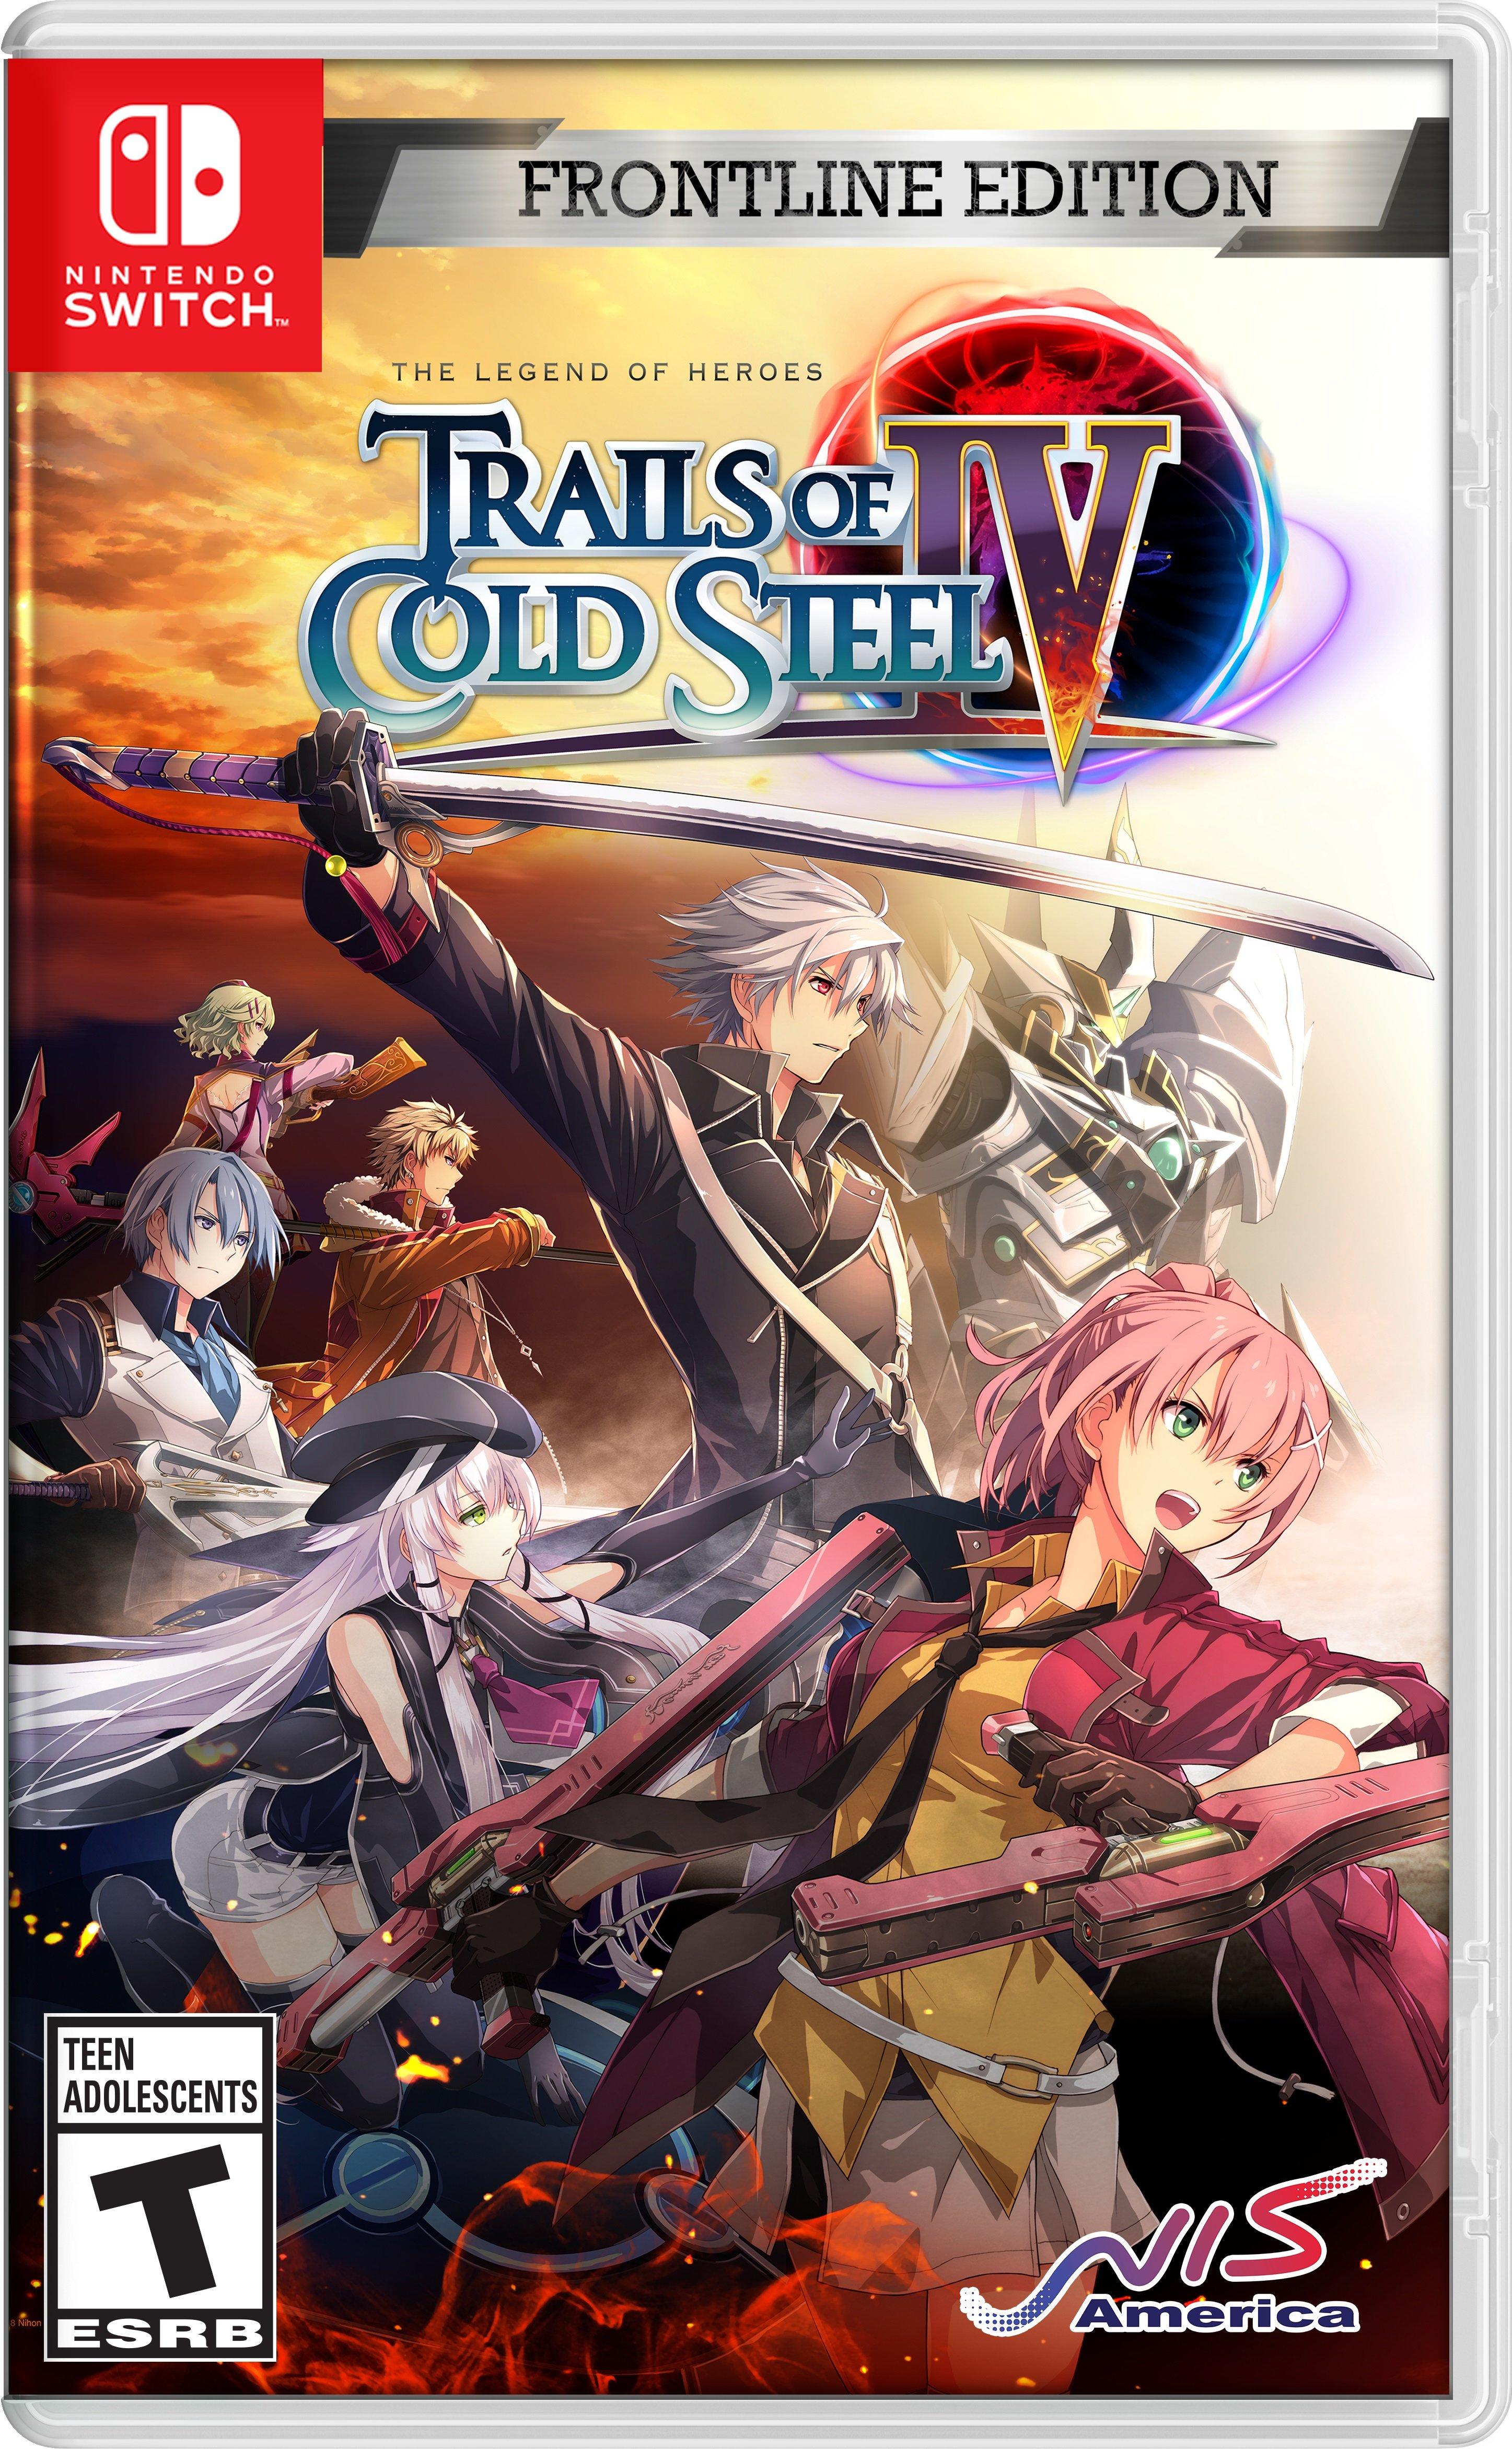 The Legend of Heroes: Trails of Cold Steel IV FRONTLINE EDITION - Nintendo Switch